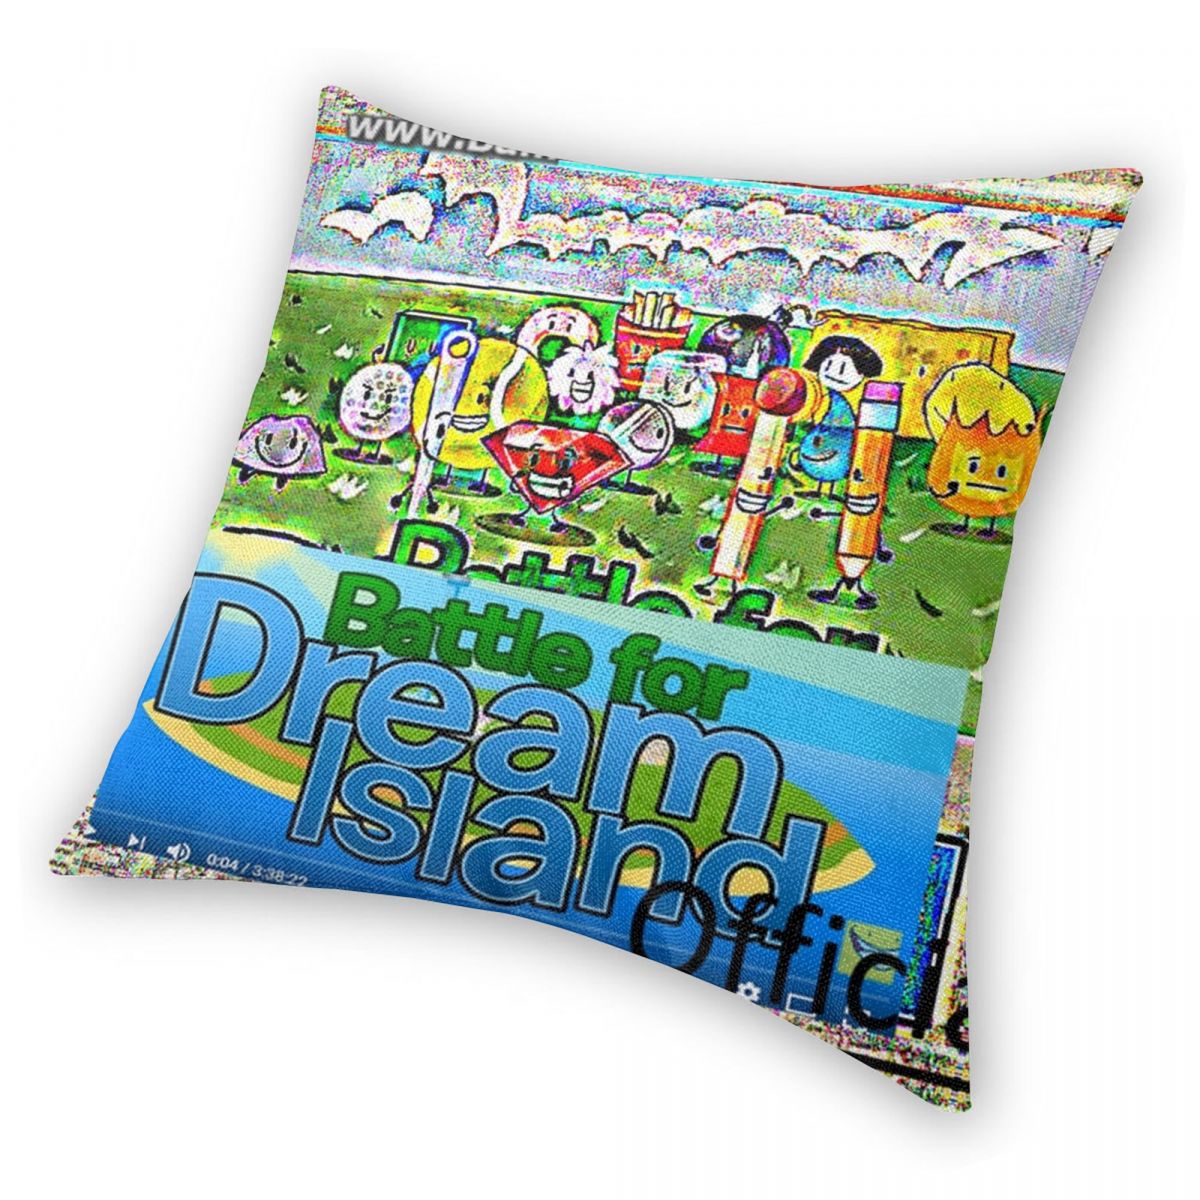 A BFDI Pillowcase Polyester Linen Velvet Printed Zip Decorative Bed Cushion Cover 18 3 - BFDI Plush